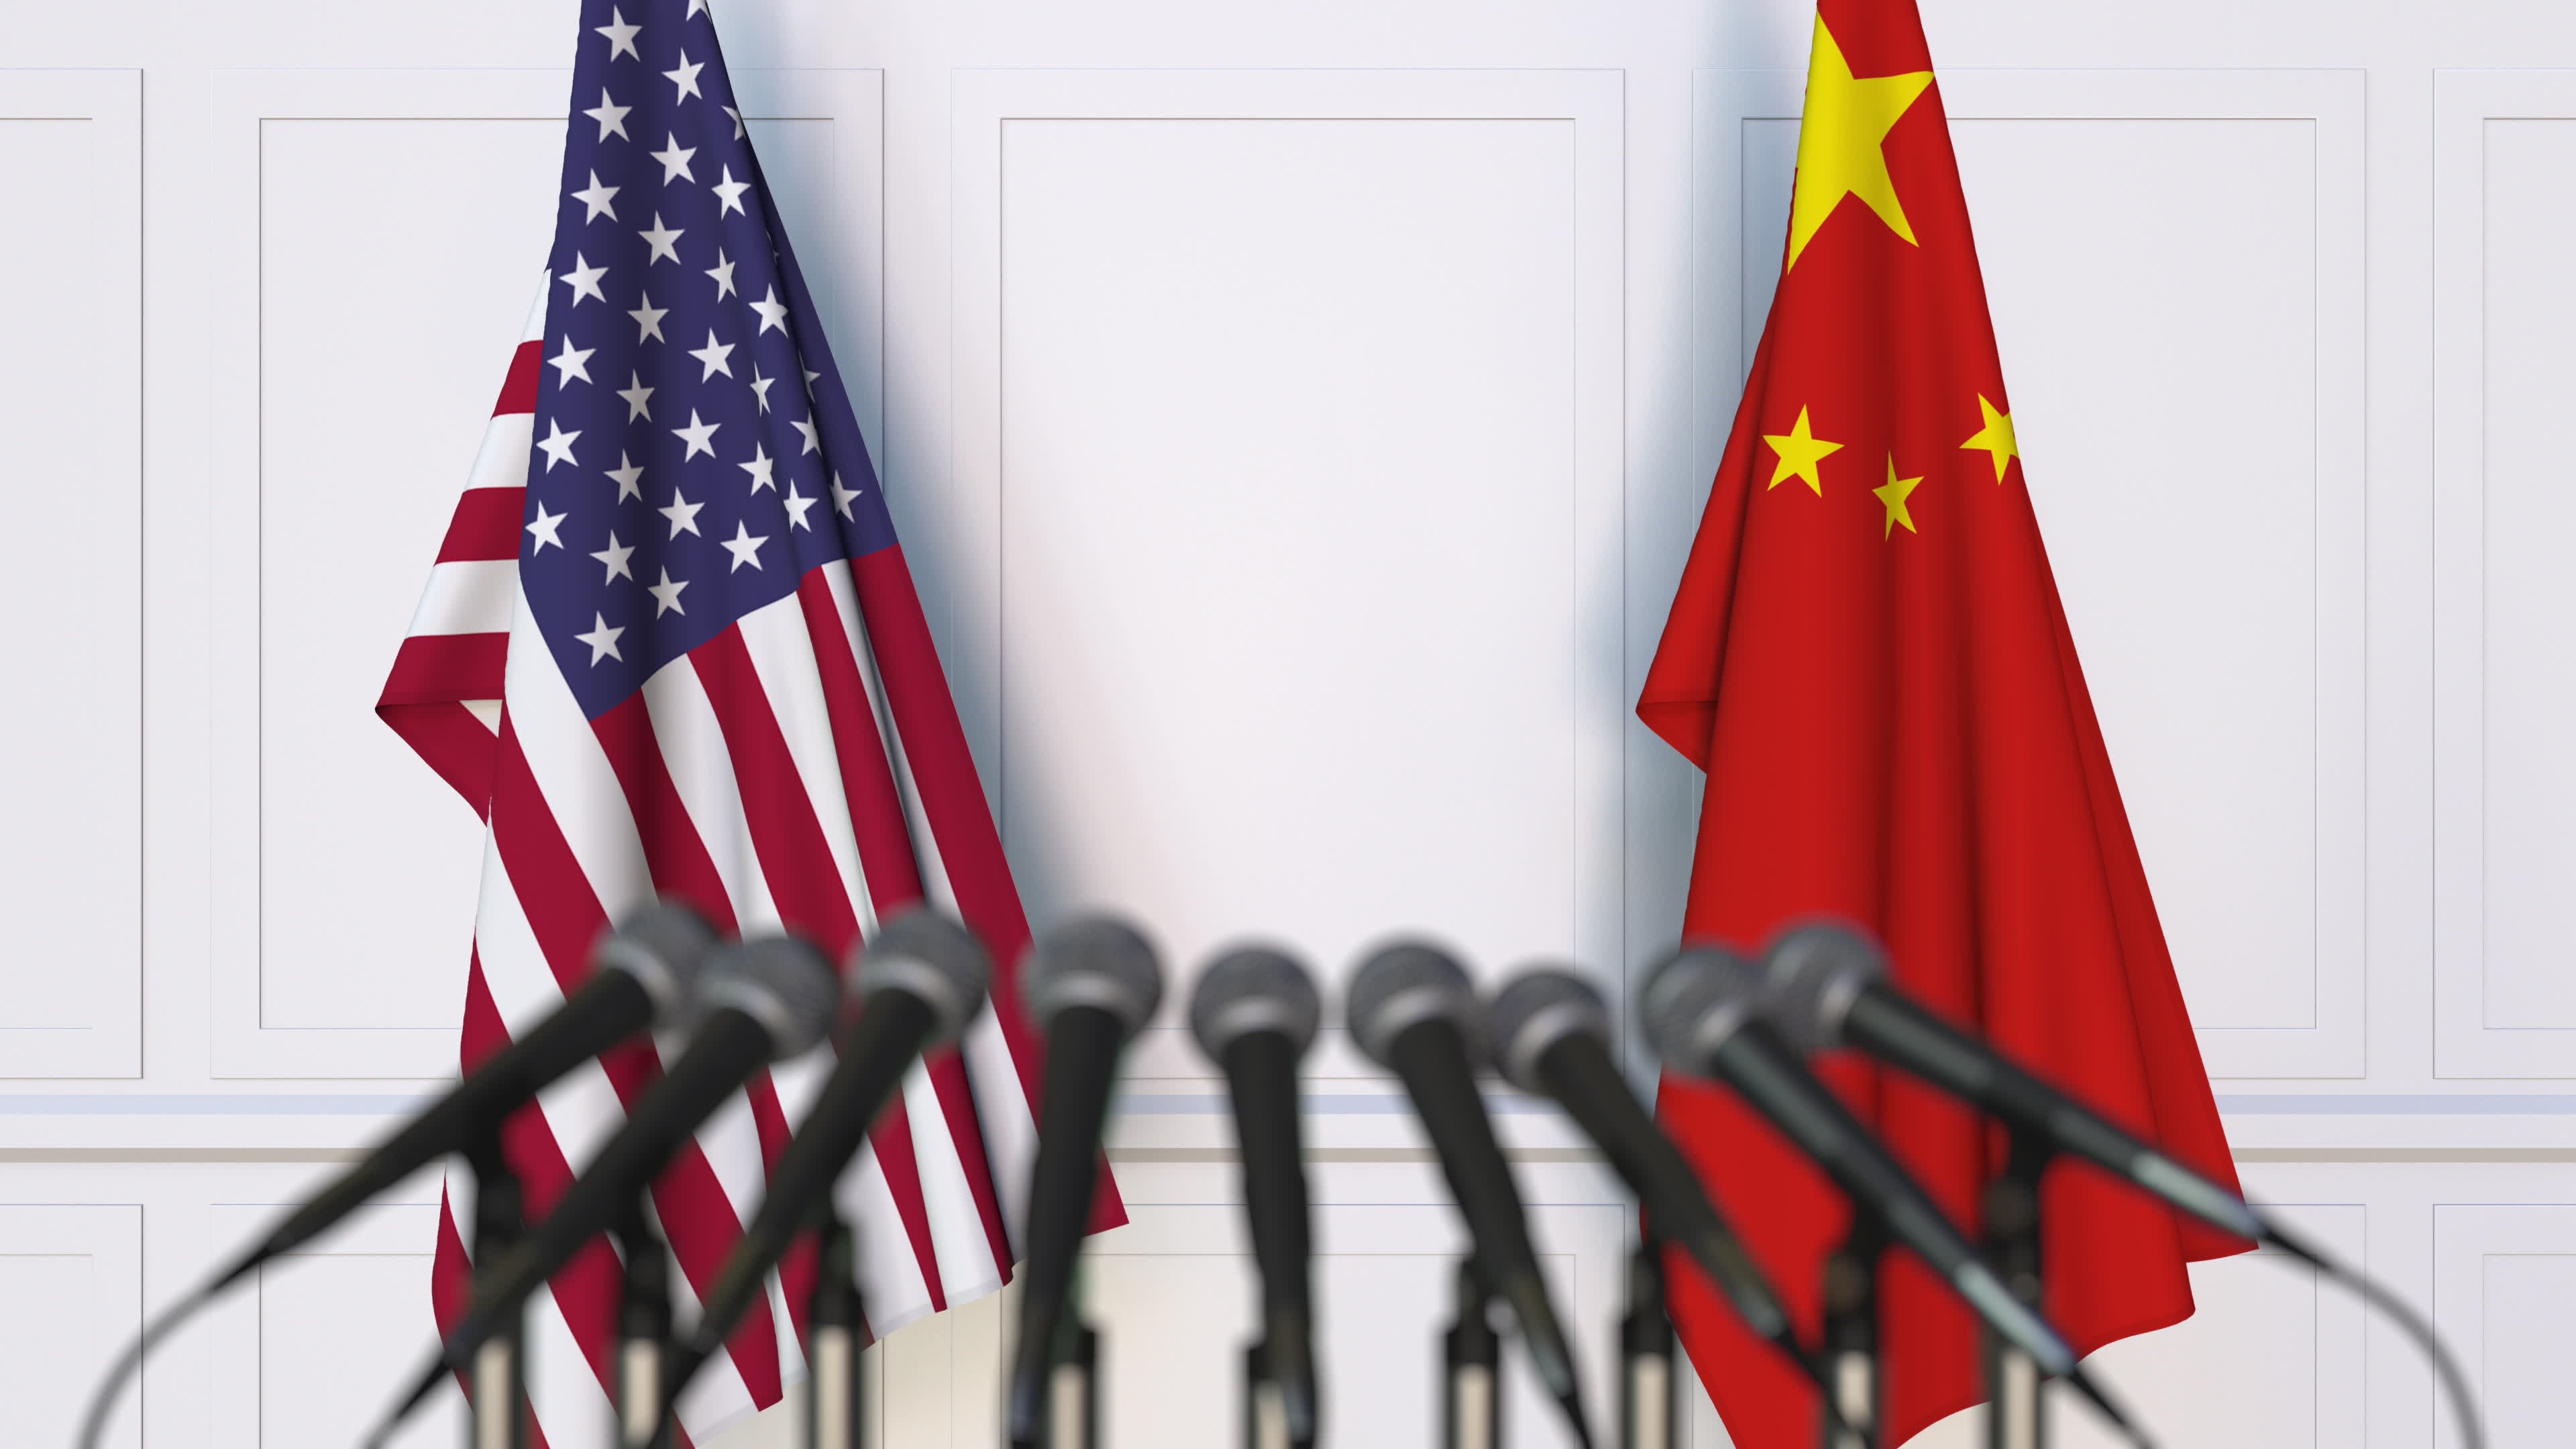 Concerns about China’s behaviour and intentions in Southeast Asia create diplomatic and economic openings for the US, according to the report by the Centre for Strategic and International Studies. Photo: Shutterstock